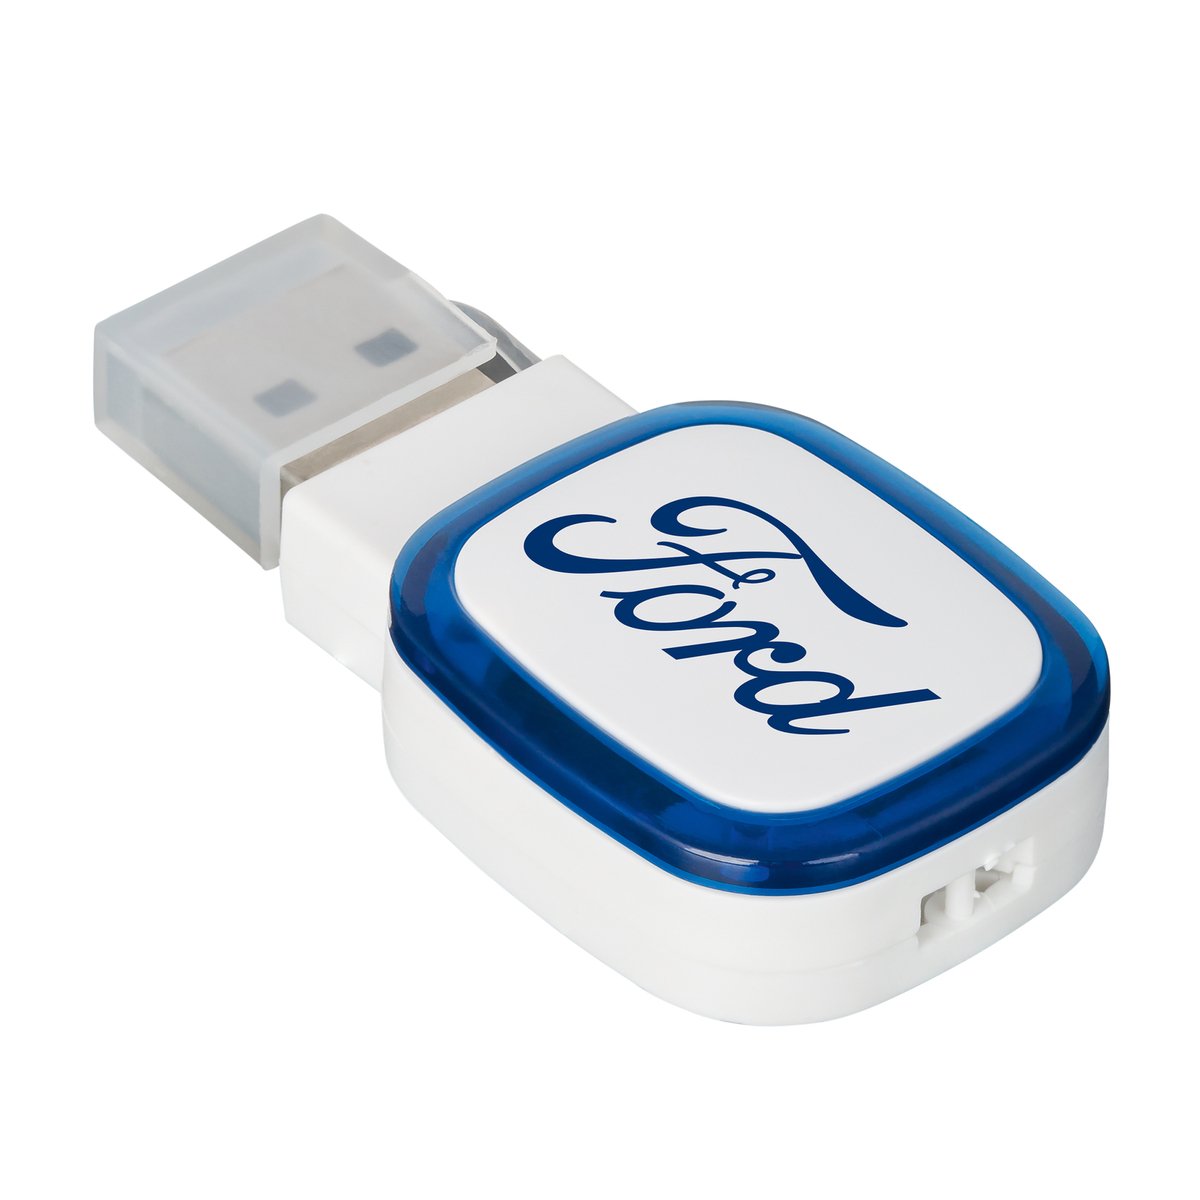 USB Flash Drive COLLECTION 500 blue 16GB